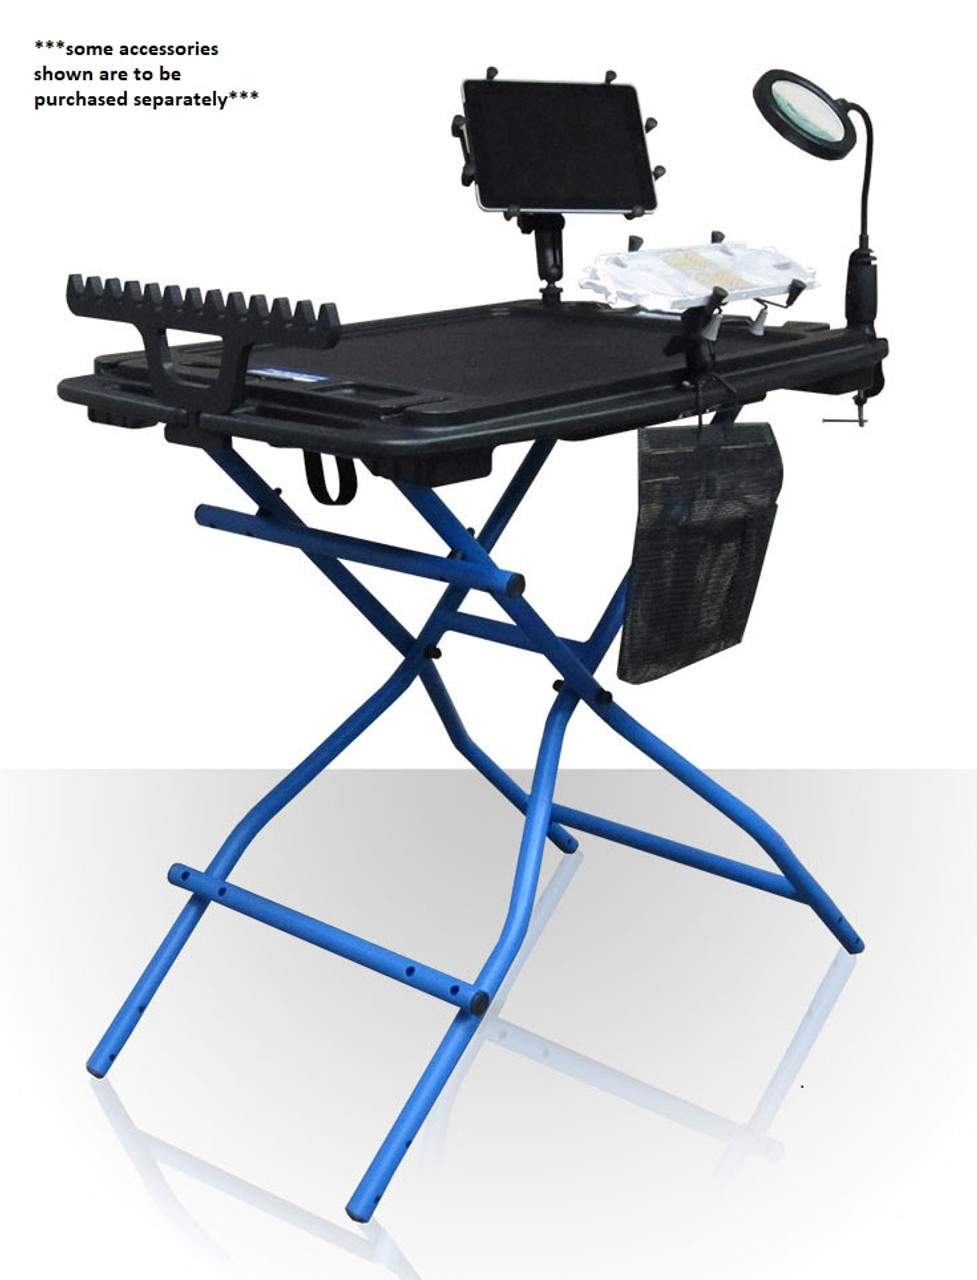 UTECK 55701 Fiber Optic Splicing Workstation, includes floor stand and two stand-off props with adju